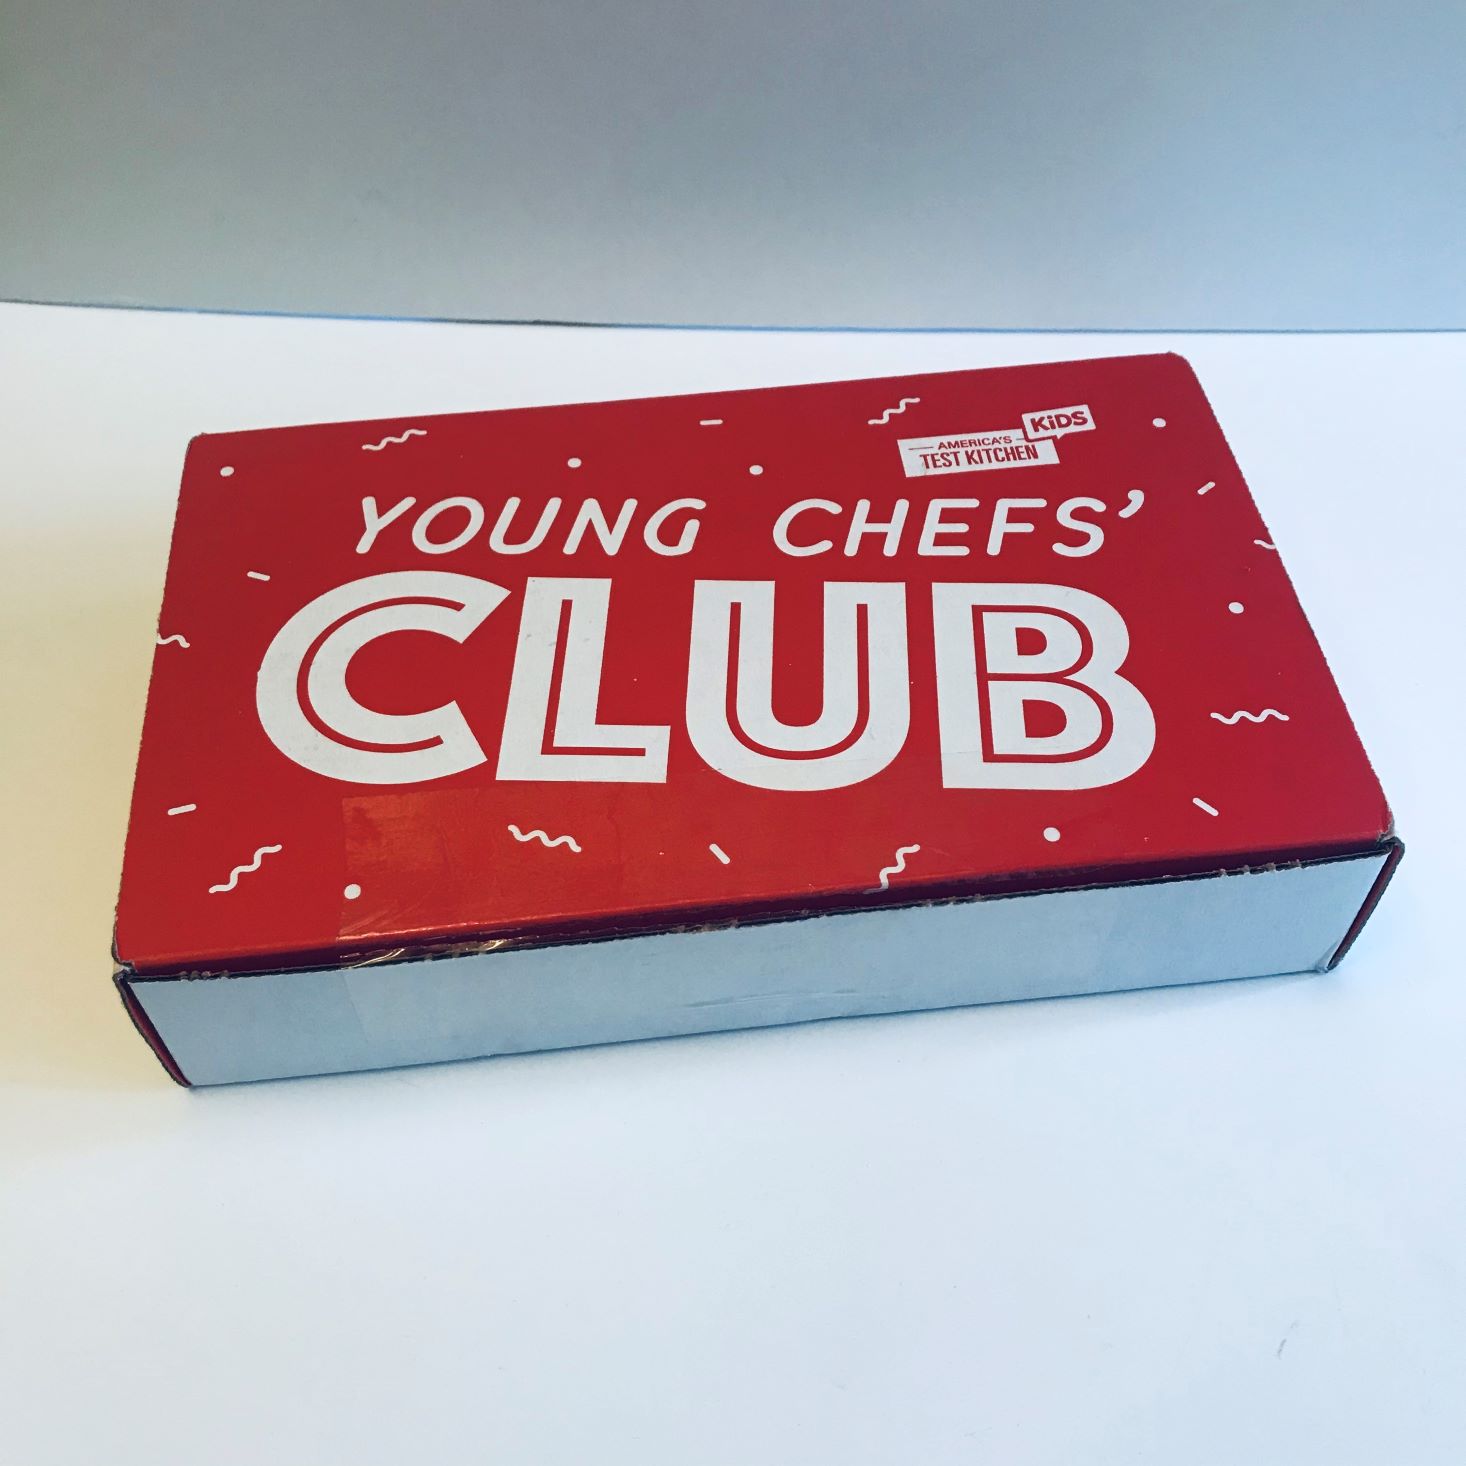 Young Chefs’ Club “Say Cheese” Review – November 2019